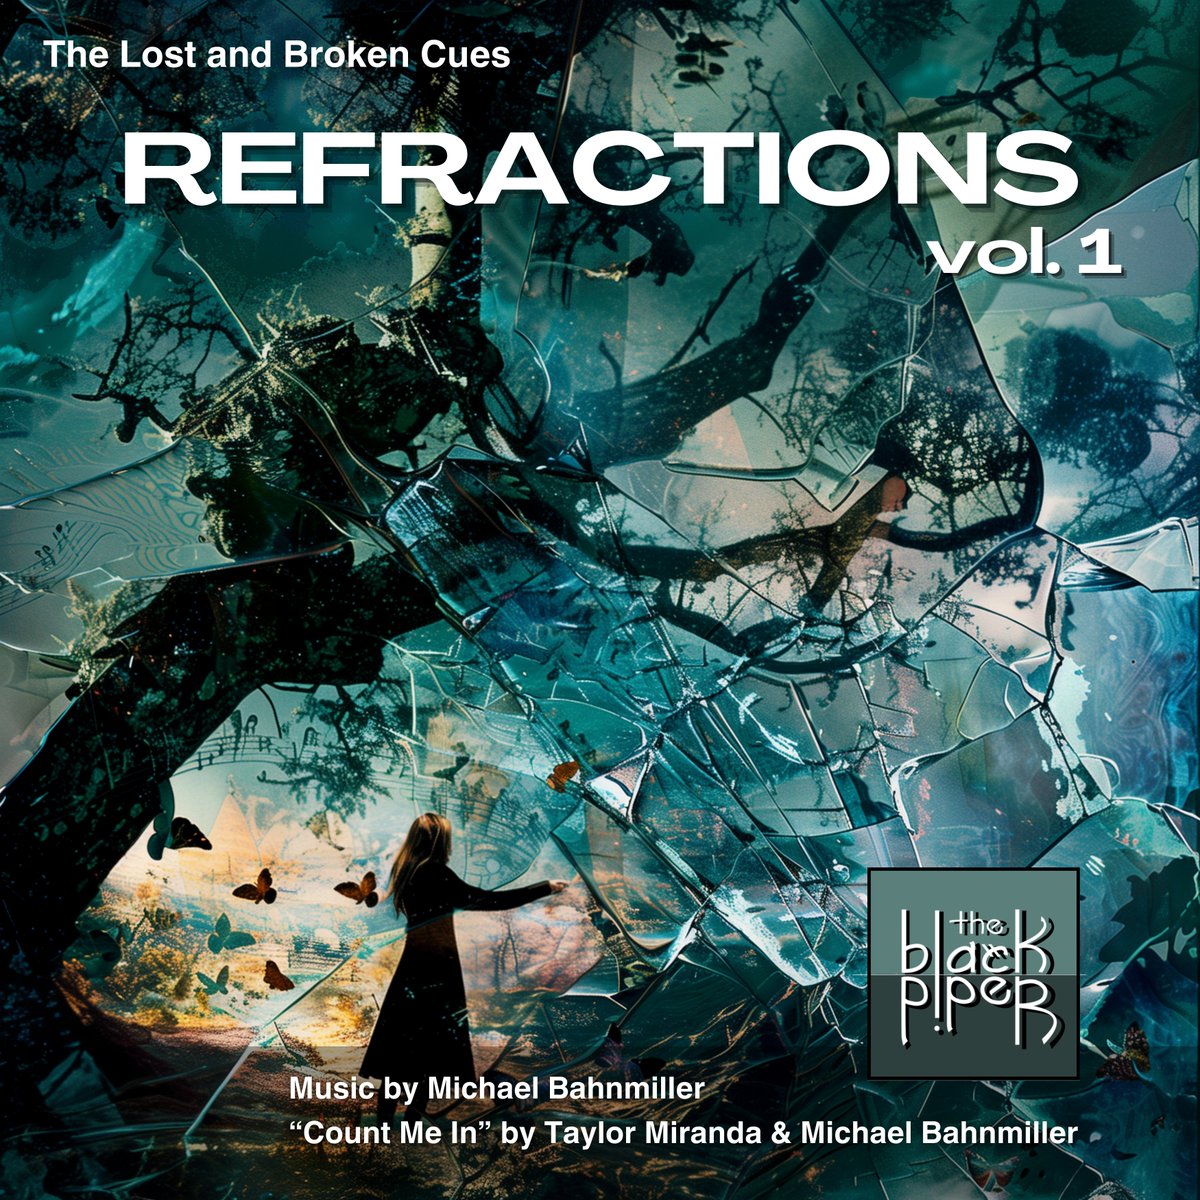 Our new album, coming soon! REFRACTIONS vol. 1 An exploration into the “lost” and “broken” and what it means to make the broken beautiful. The album collects film cues, songs, and demos that were either rejected for their intended purpose, incomplete, or otherwise “broken” or